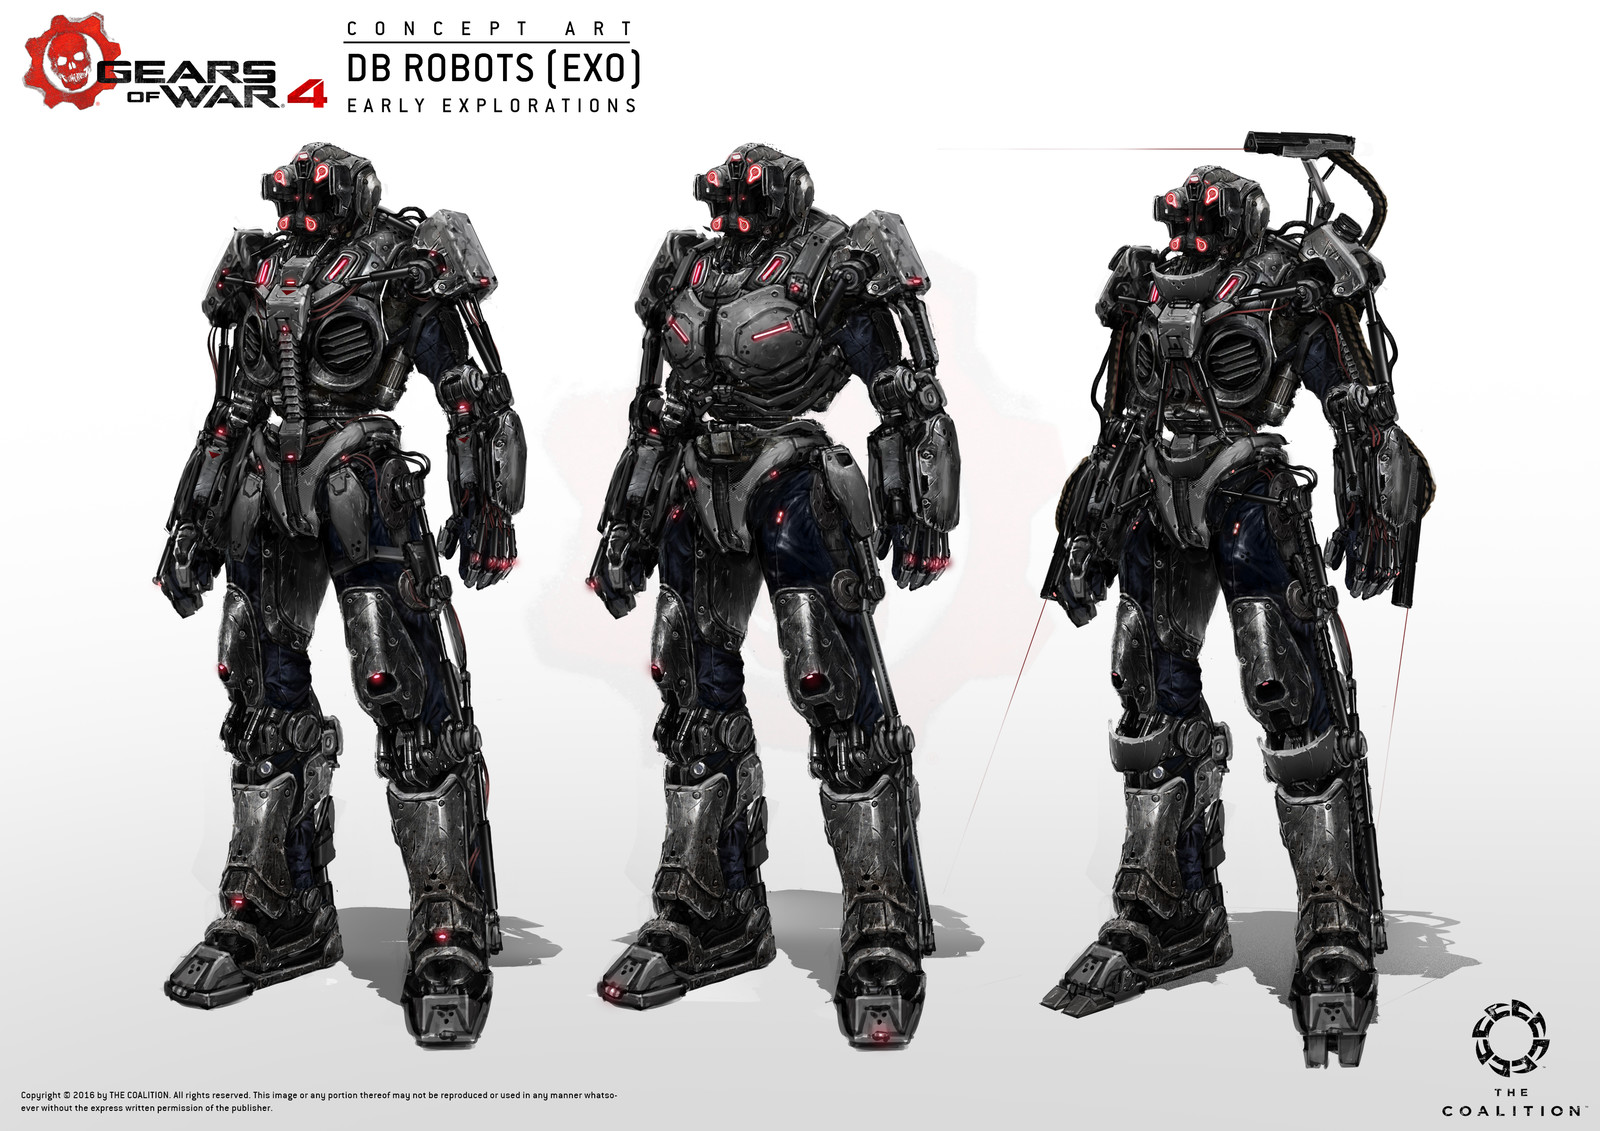 Early explorations of the exo suit. I still remember at one point I proposed that players would be able to rip off the exos from the robots, then put them on for extra devastation haha